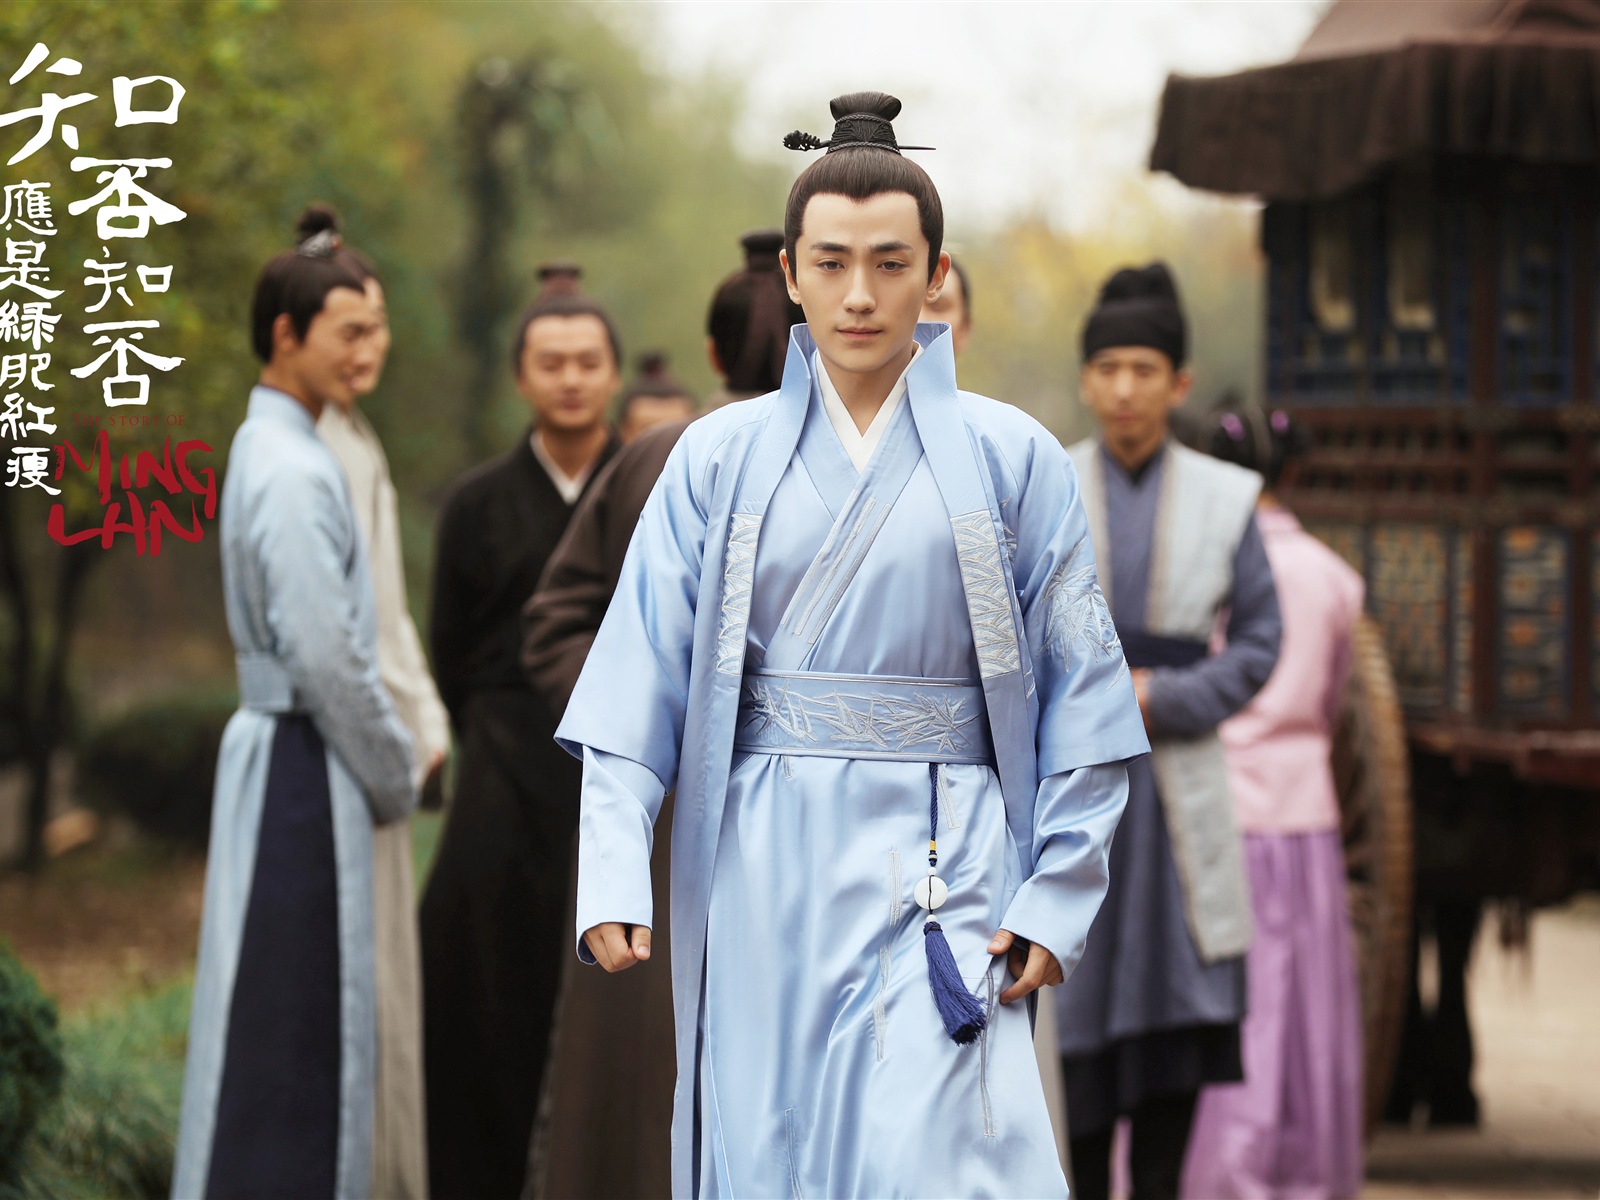 The Story Of MingLan, TV series HD wallpapers #54 - 1600x1200